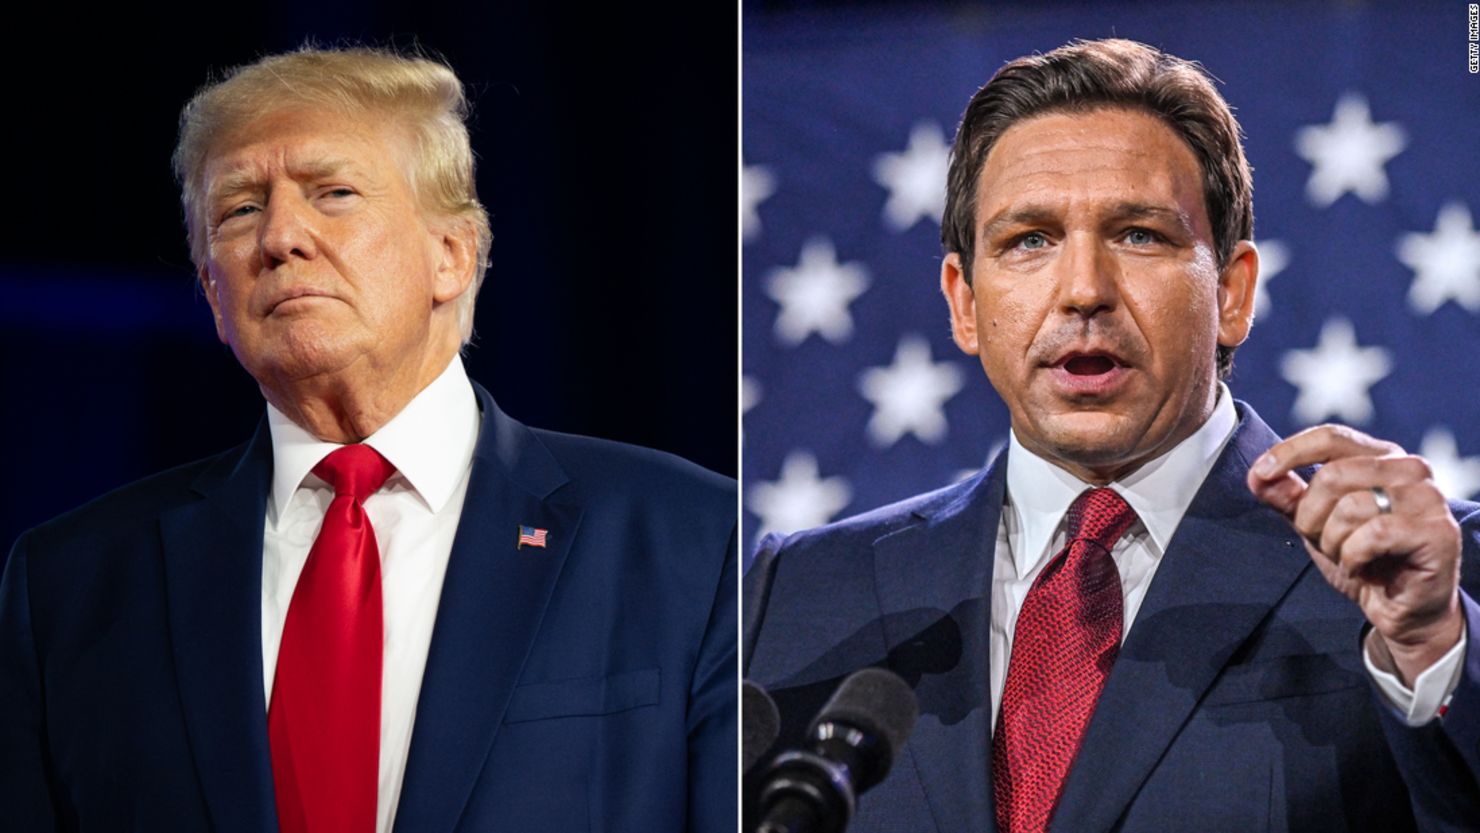 Trump and DeSantis: The two biggest 2024 Republican names would